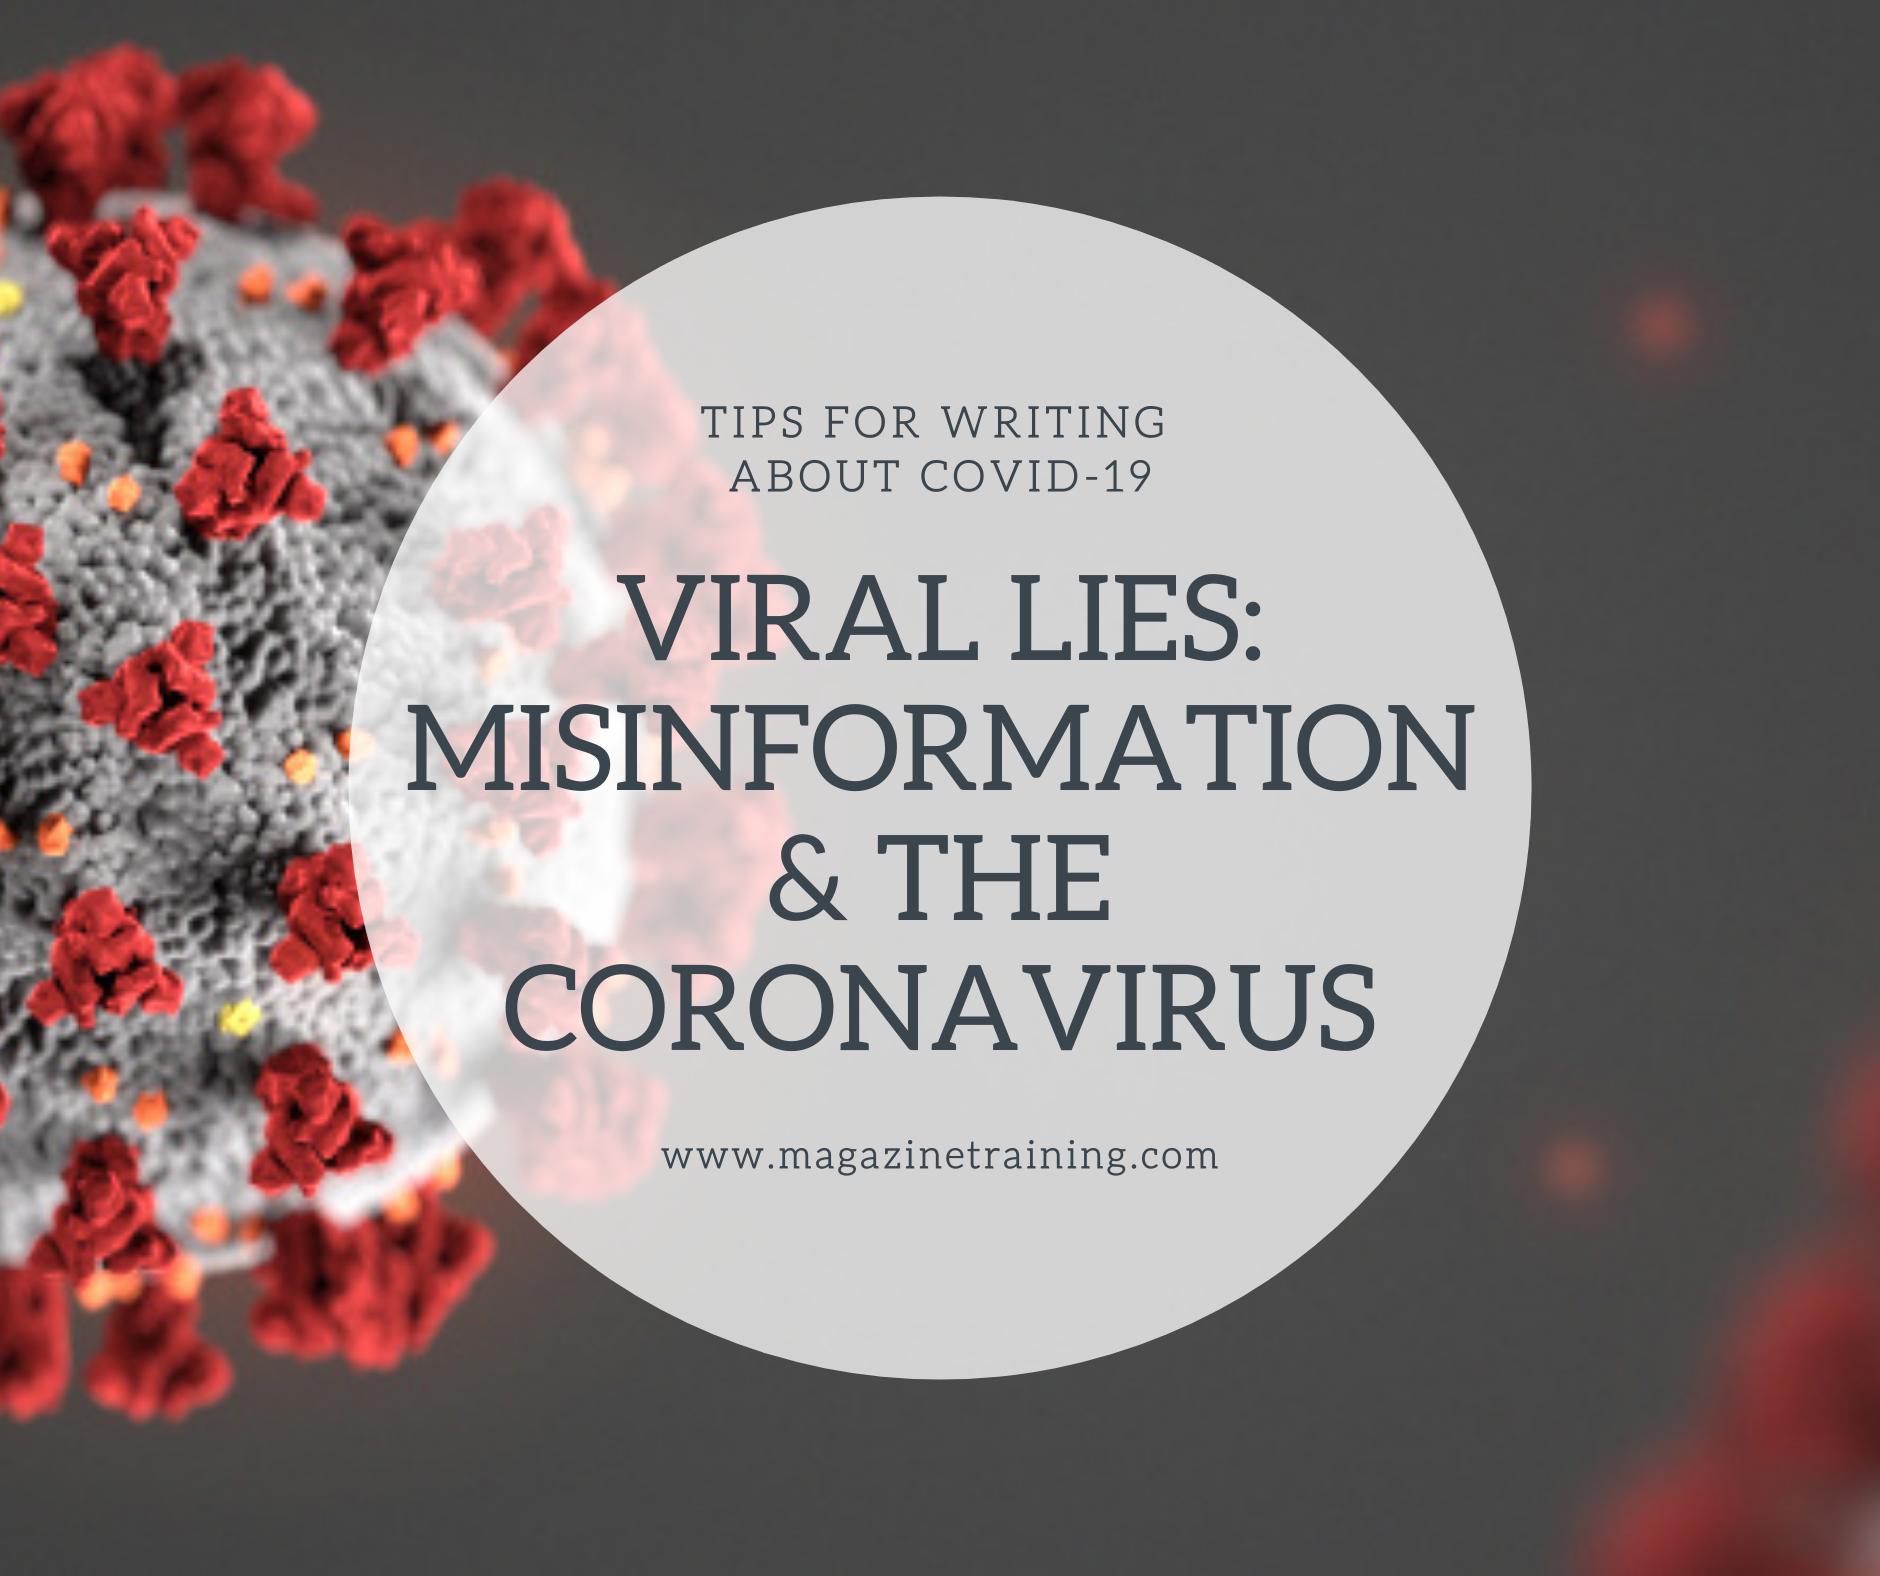 misinformation and COVID-19